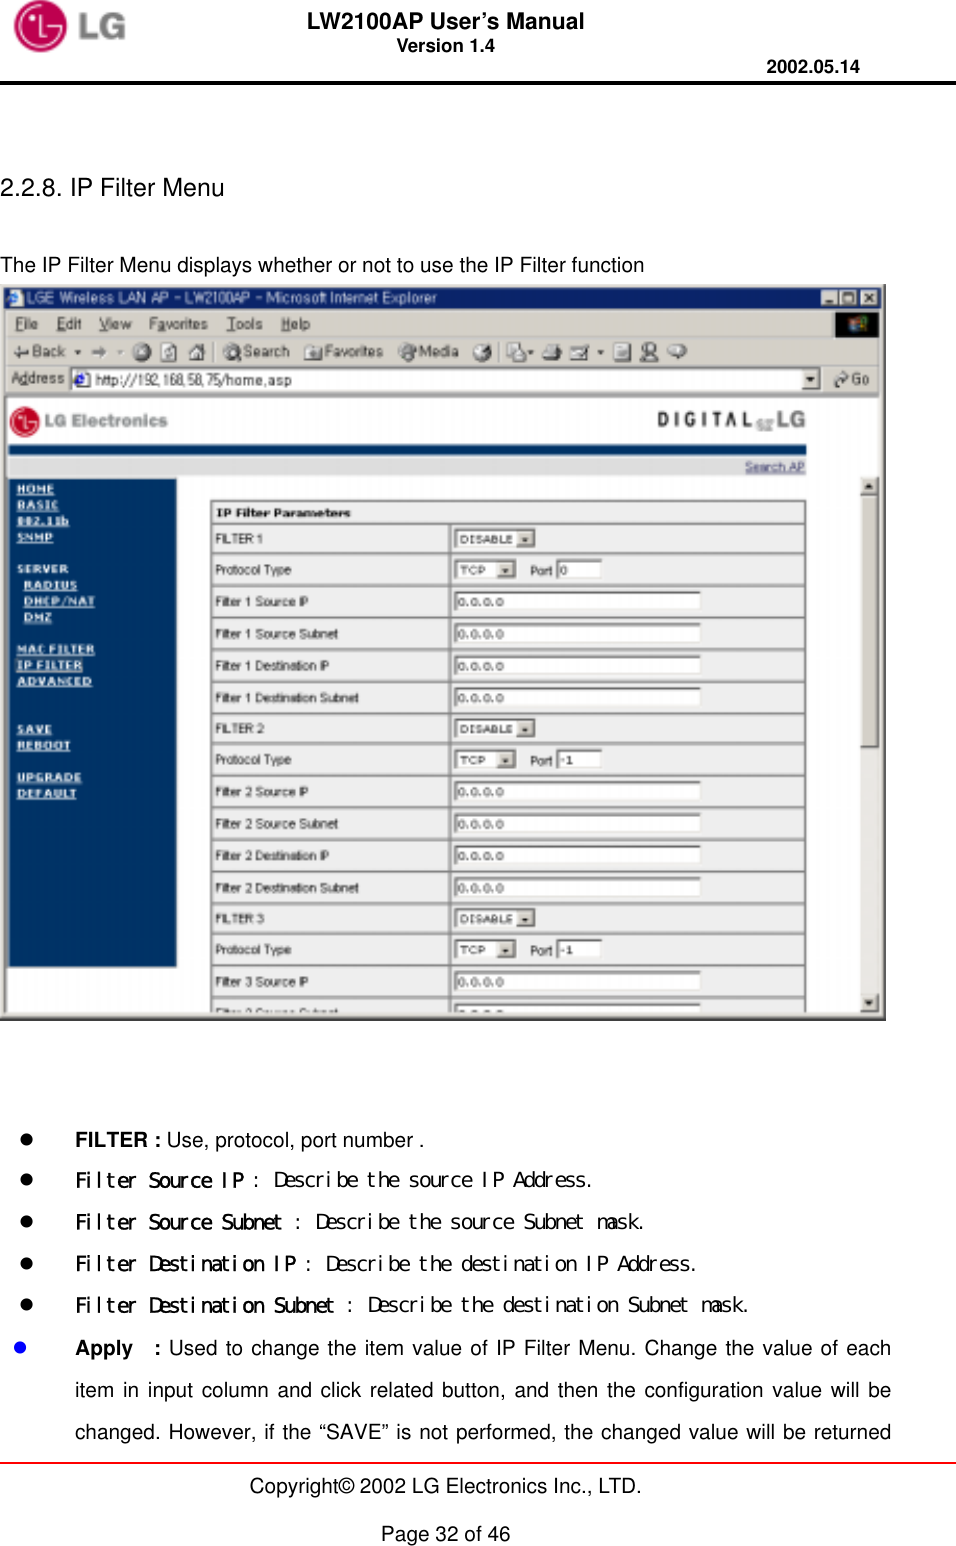 LW2100AP User’s Manual Version 1.4 2002.05.14   Copyright© 2002 LG Electronics Inc., LTD.  Page 32 of 46   2.2.8. IP Filter Menu  The IP Filter Menu displays whether or not to use the IP Filter function        FILTER : Use, protocol, port number .     Filter Source IP : Describe the source IP Address.   Filter Source Subnet : Describe the source Subnet mask.   Filter Destination IP : Describe the destination IP Address.   Filter Destination Subnet : Describe the destination Subnet mask.   Apply  : Used to change the item value of IP Filter Menu. Change the value of each item in input column and click related button, and then the configuration value will be changed. However, if the “SAVE” is not performed, the changed value will be returned 